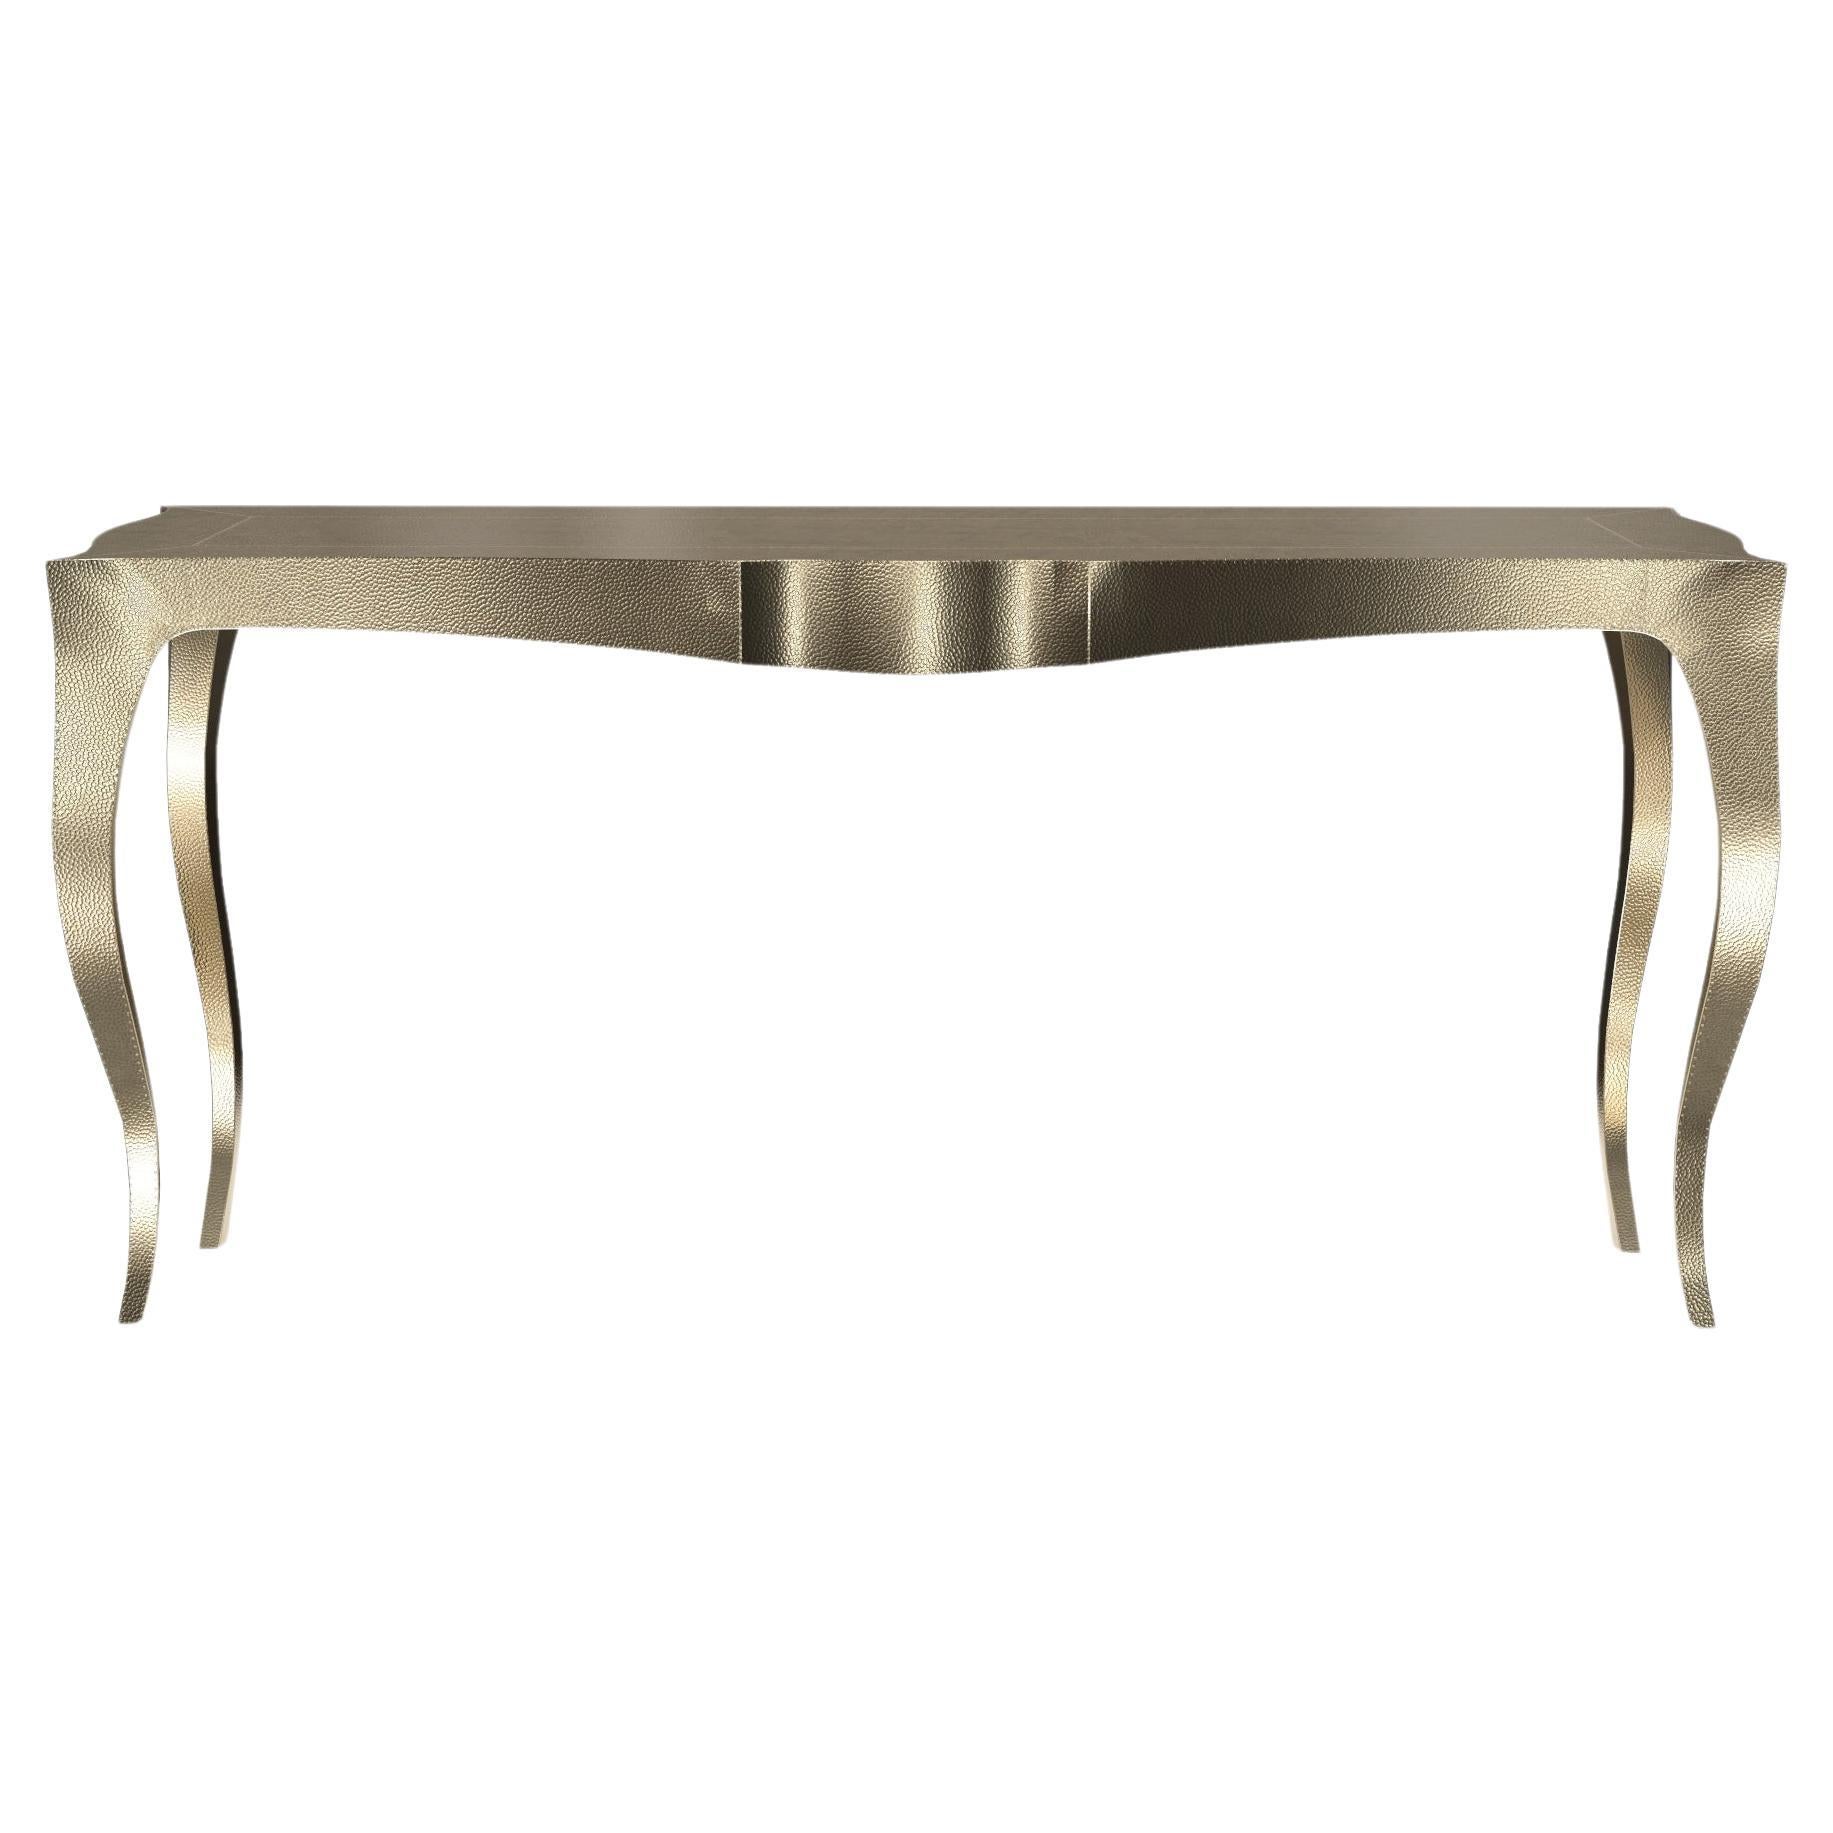 Louise Console Art Deco Industrial and Work Tables Mid. Hammered Brass 